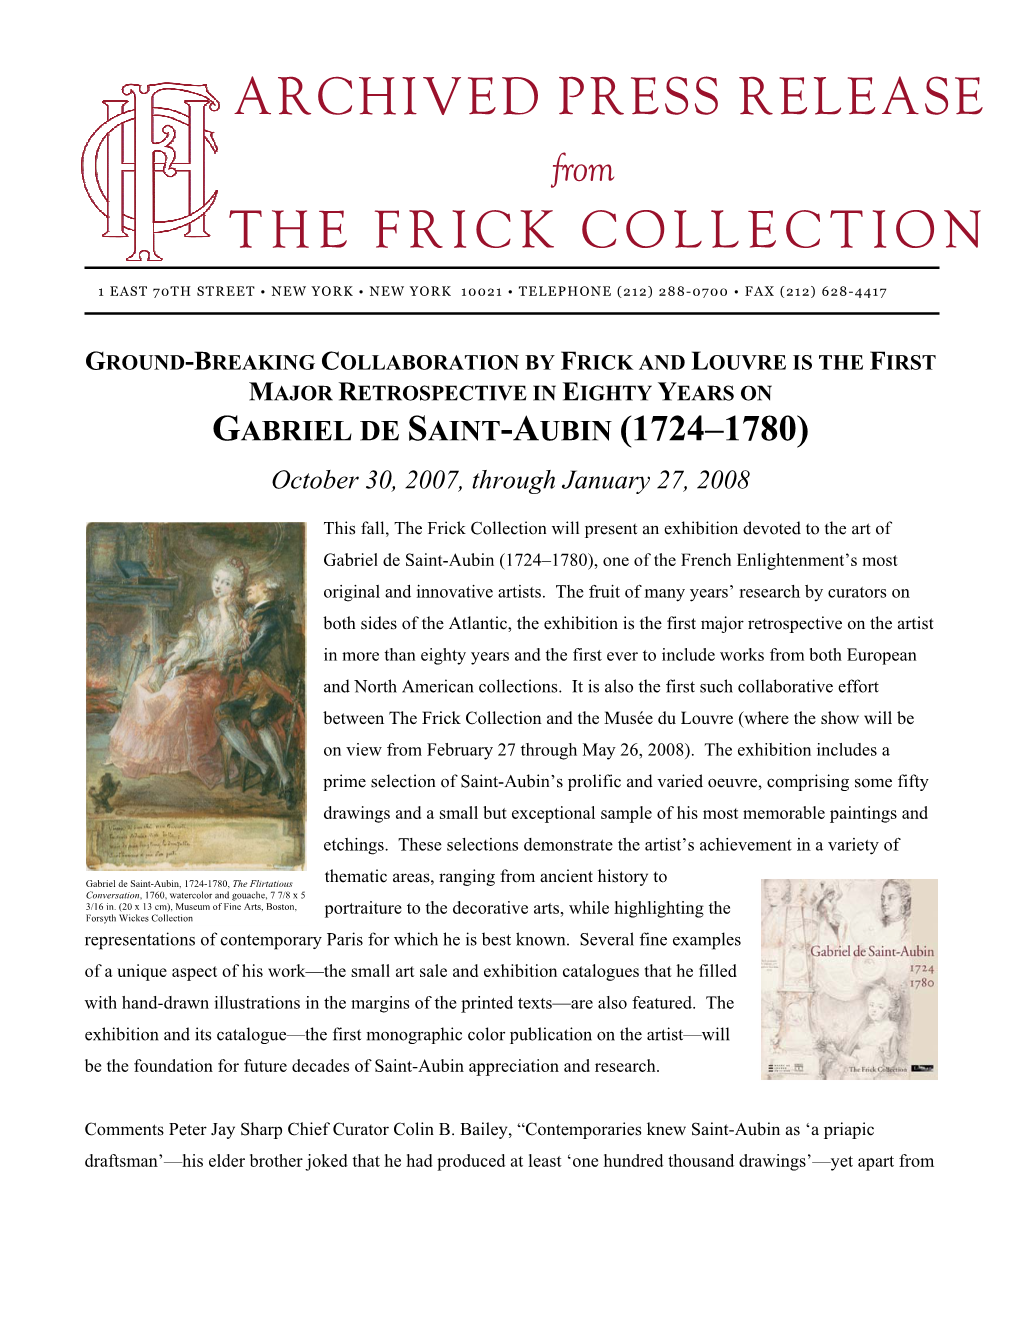 PRESS RELEASE from the FRICK COLLECTION